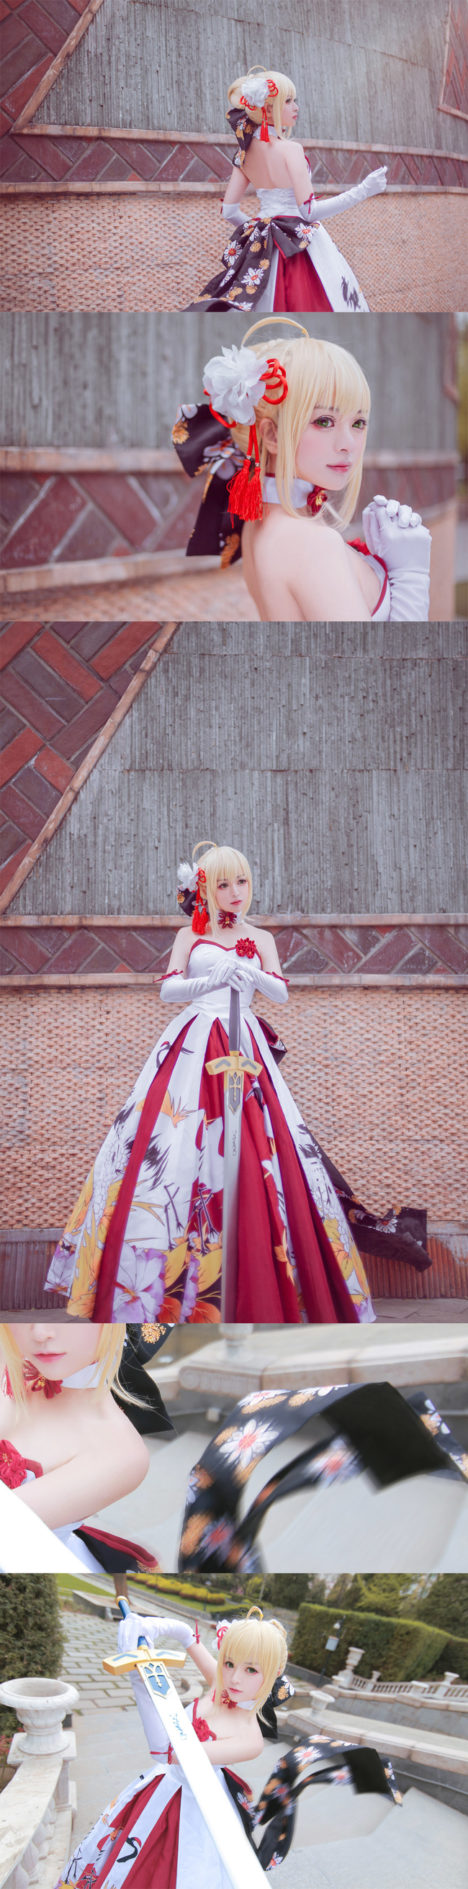 Valiant-Armed-Saber-Cosplay-7